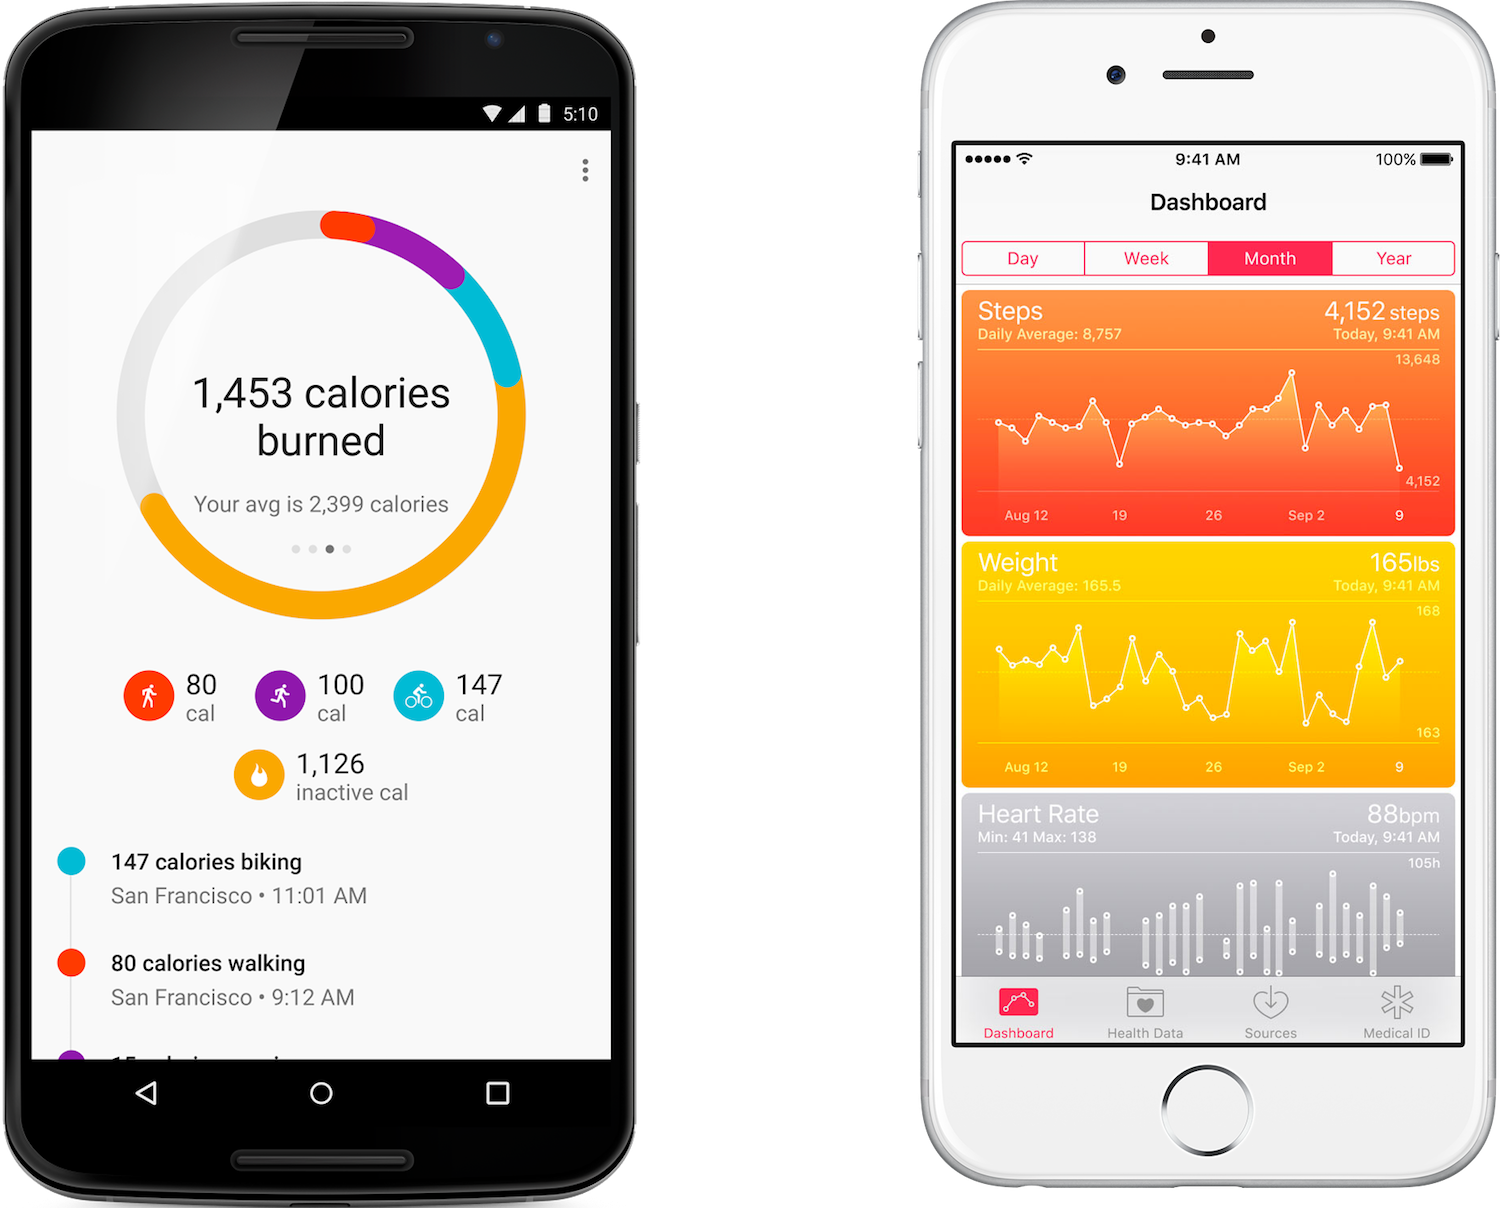 Google Fit: Activity Tracking - Apps on Google Play